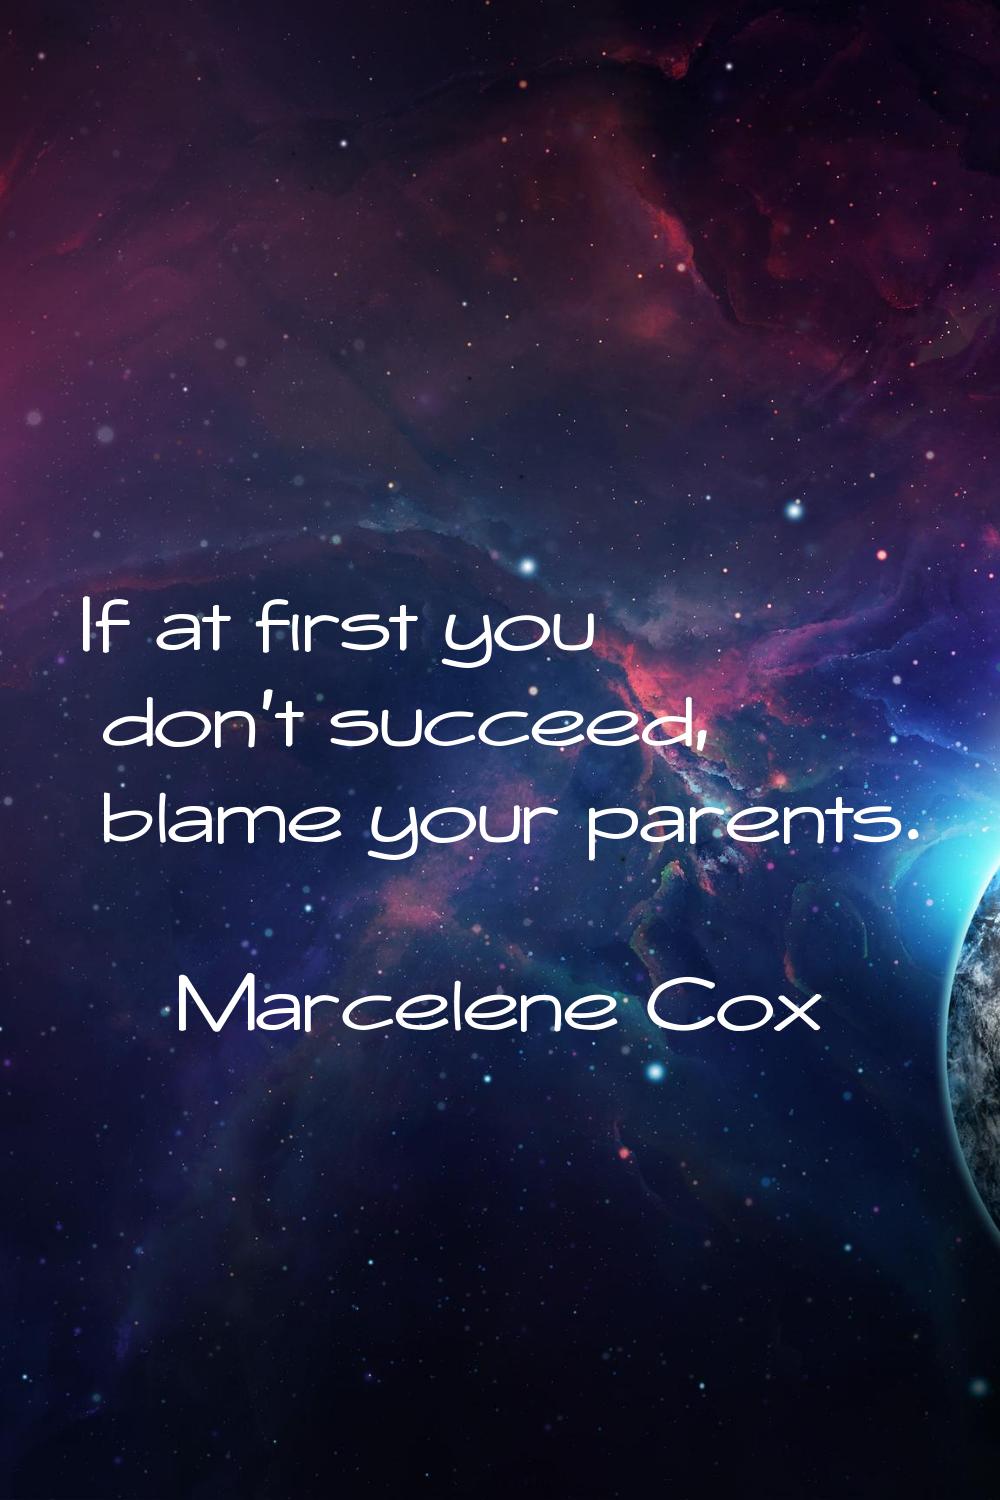 If at first you don't succeed, blame your parents.